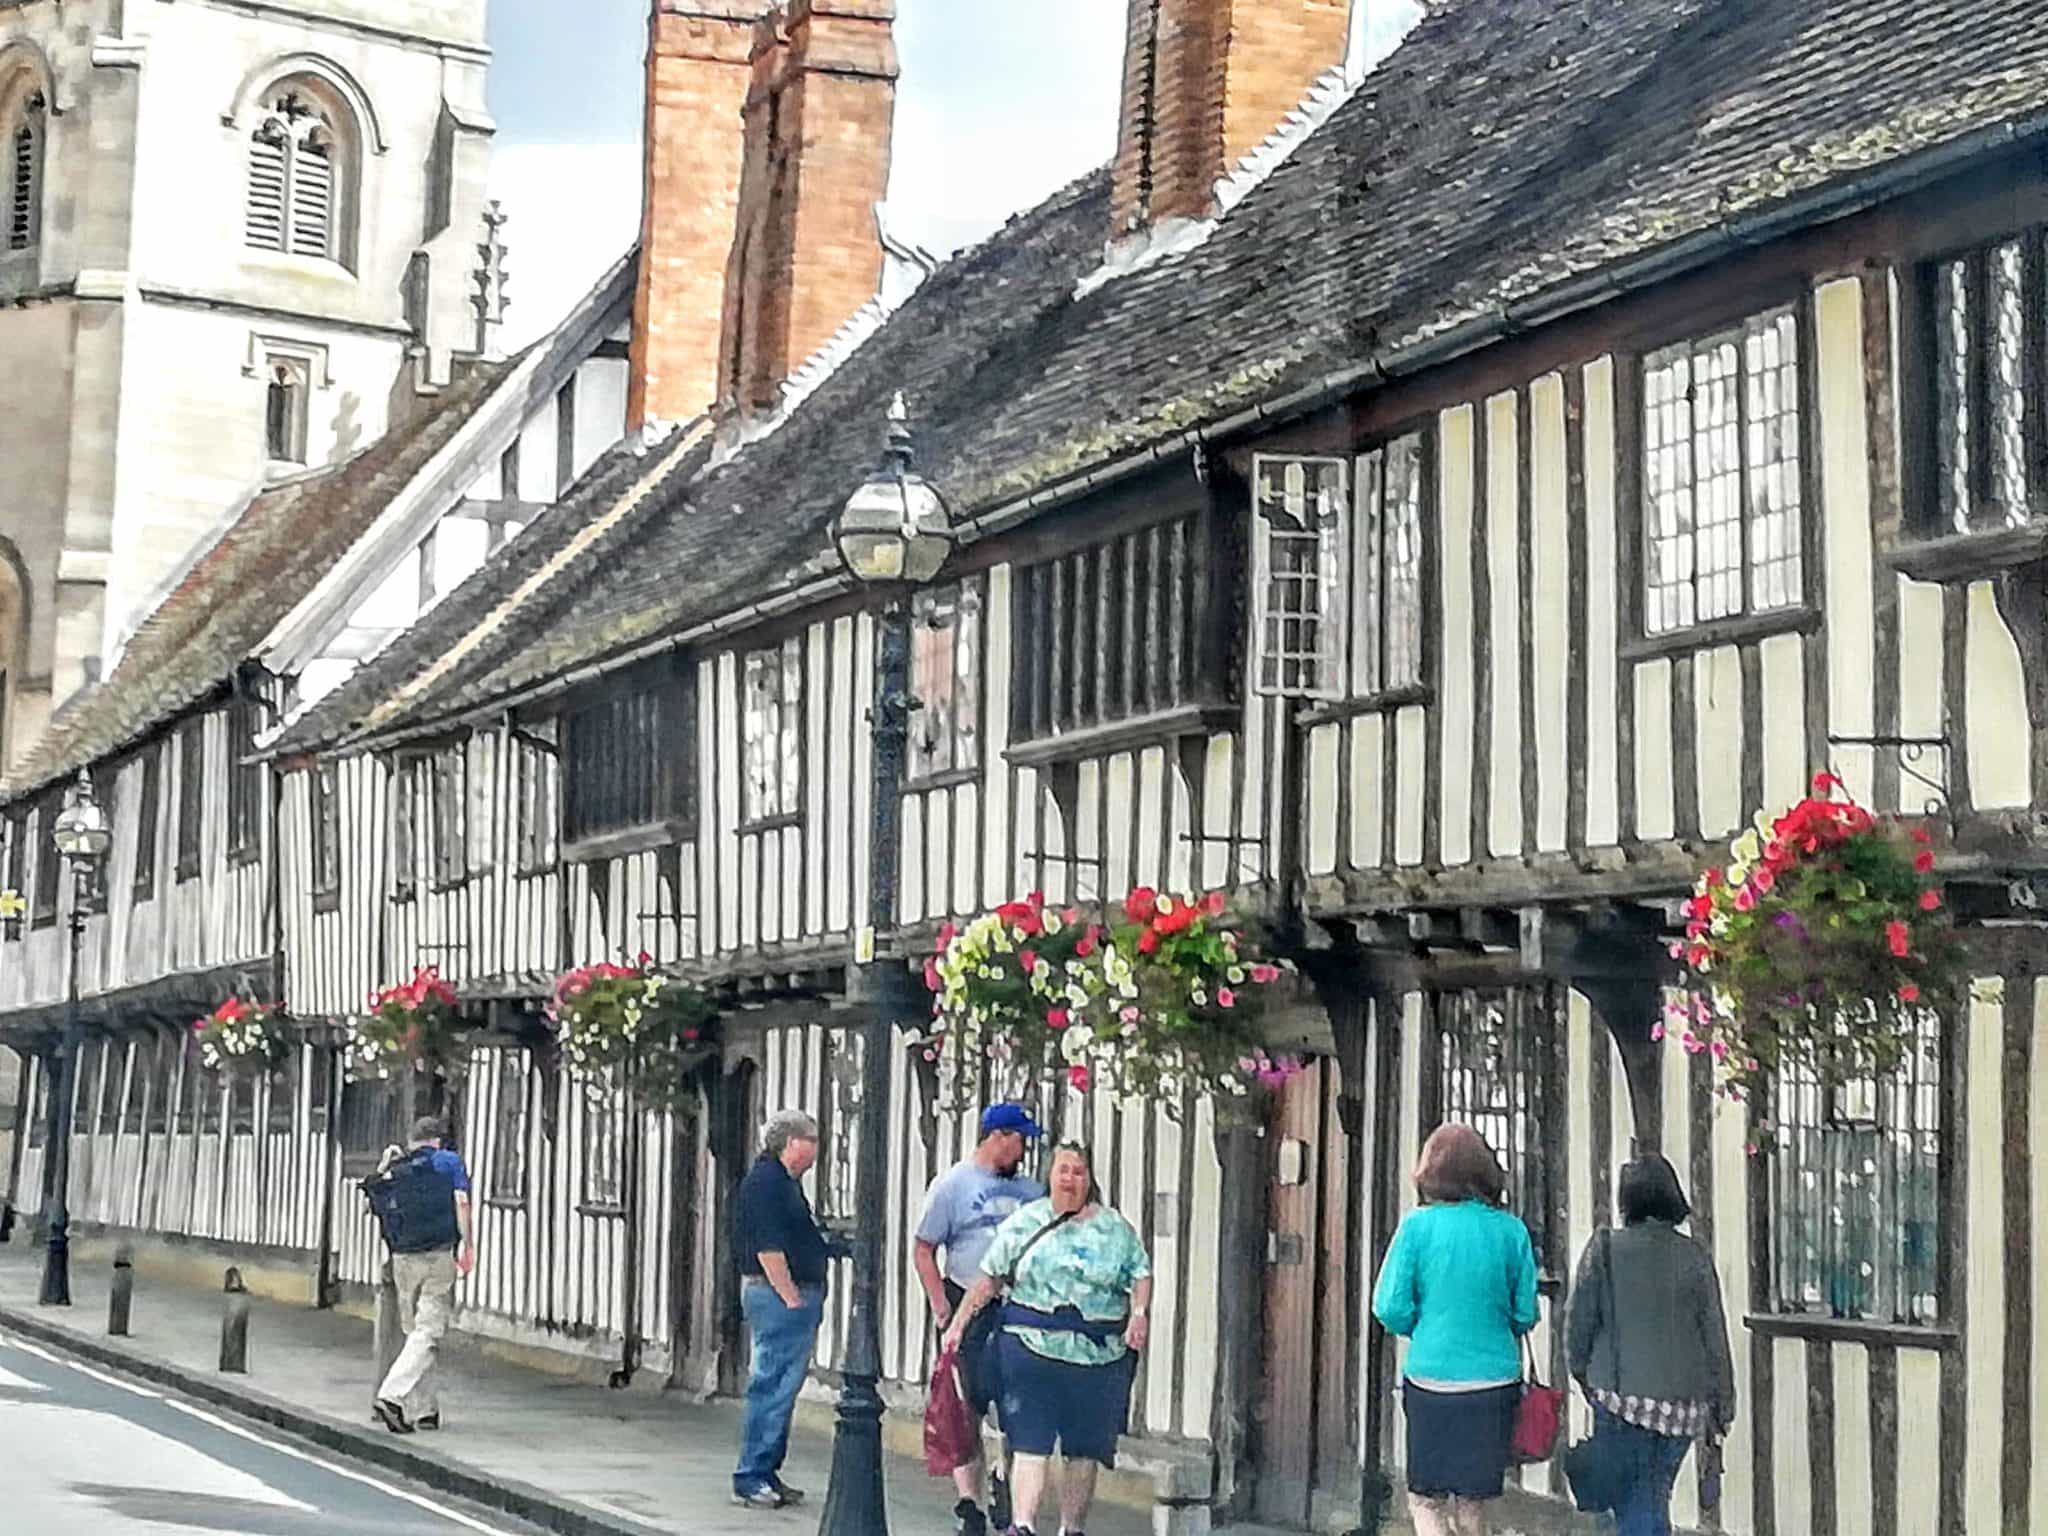 The famous almshouses of Stratford built in the 15the century. They are white buildings with black timbered beams and leaded glass windows